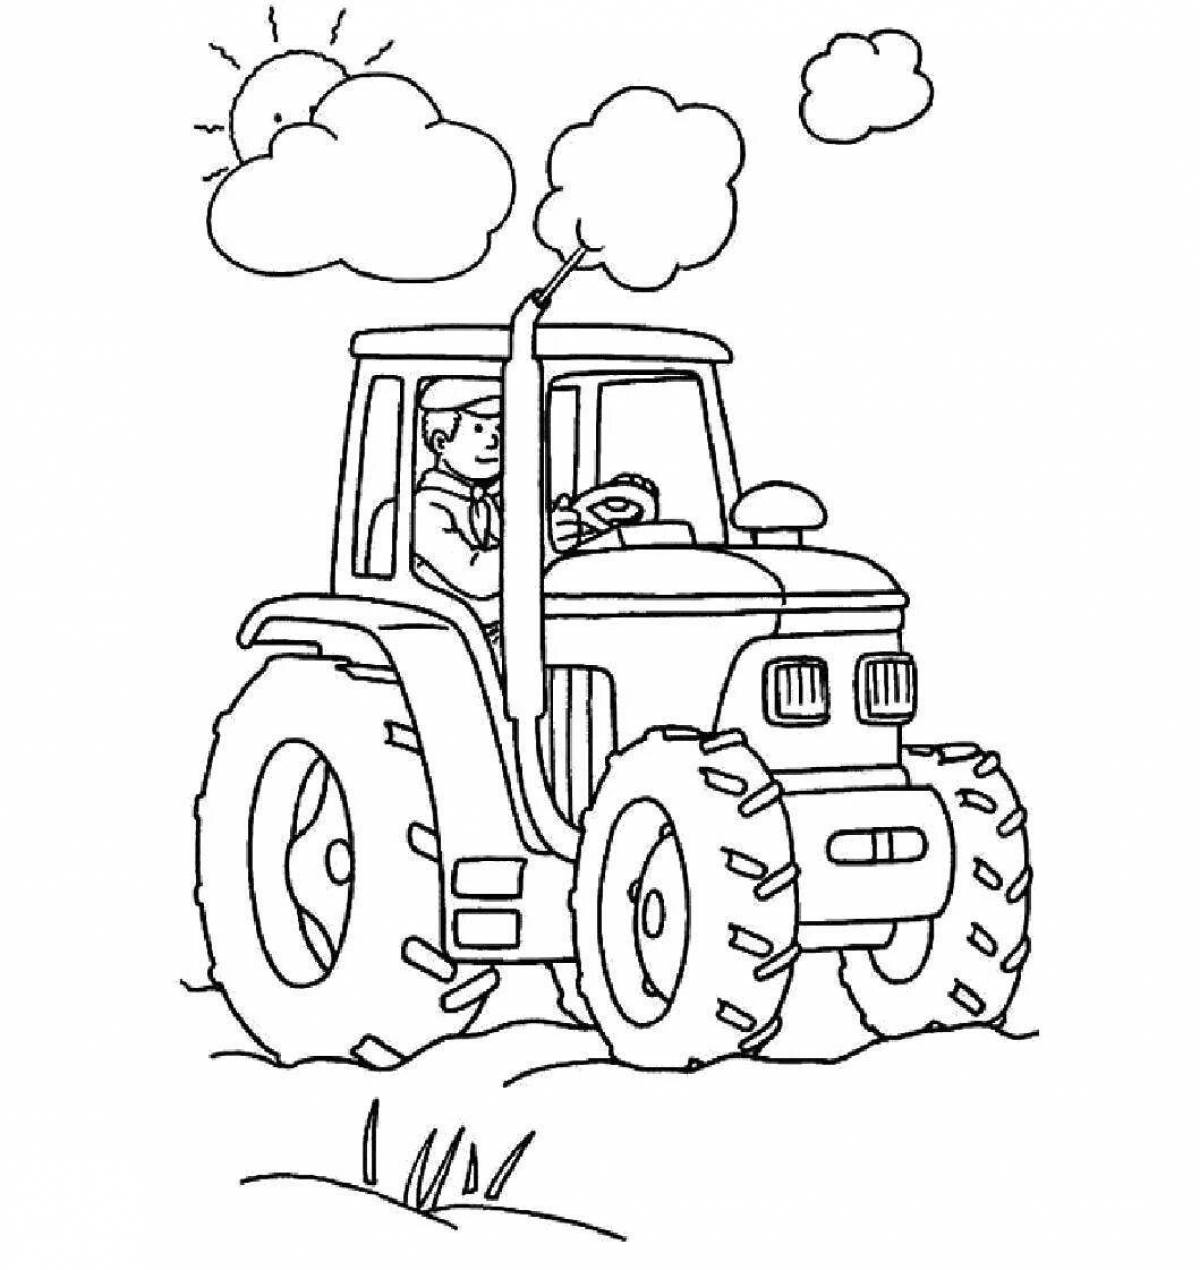 Tractor drawing #2